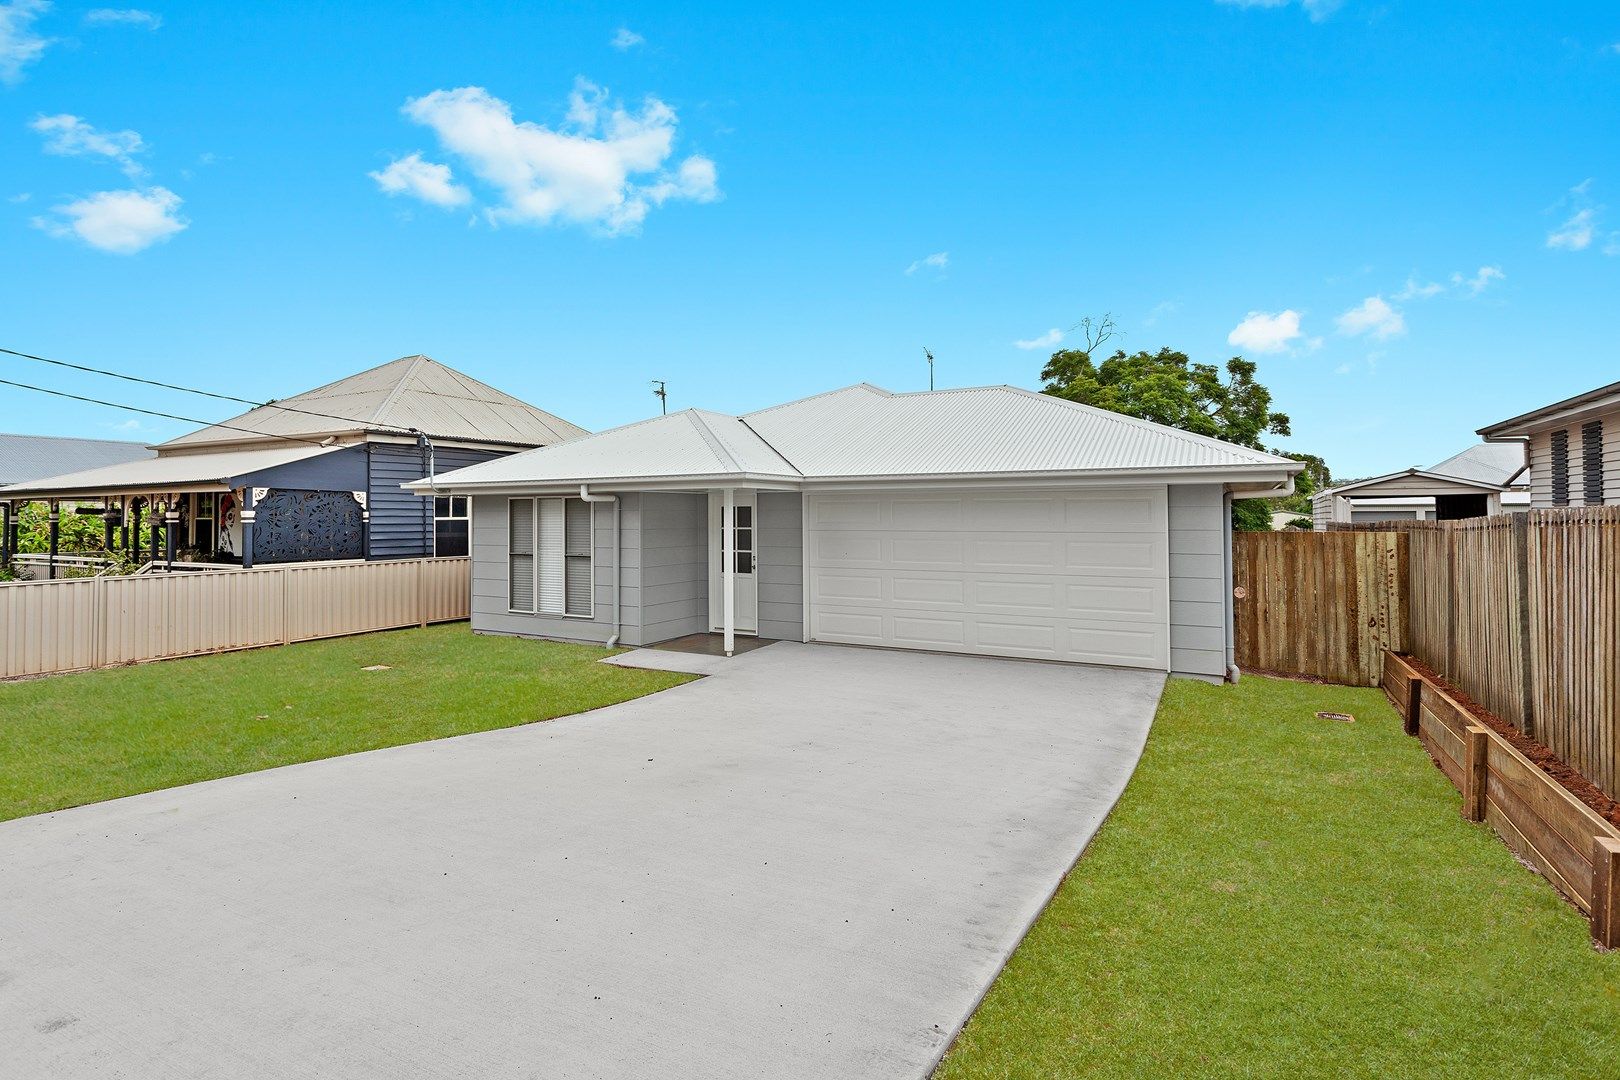 4 bedrooms House in 9 Gauntlet Street NORTH TOOWOOMBA QLD, 4350